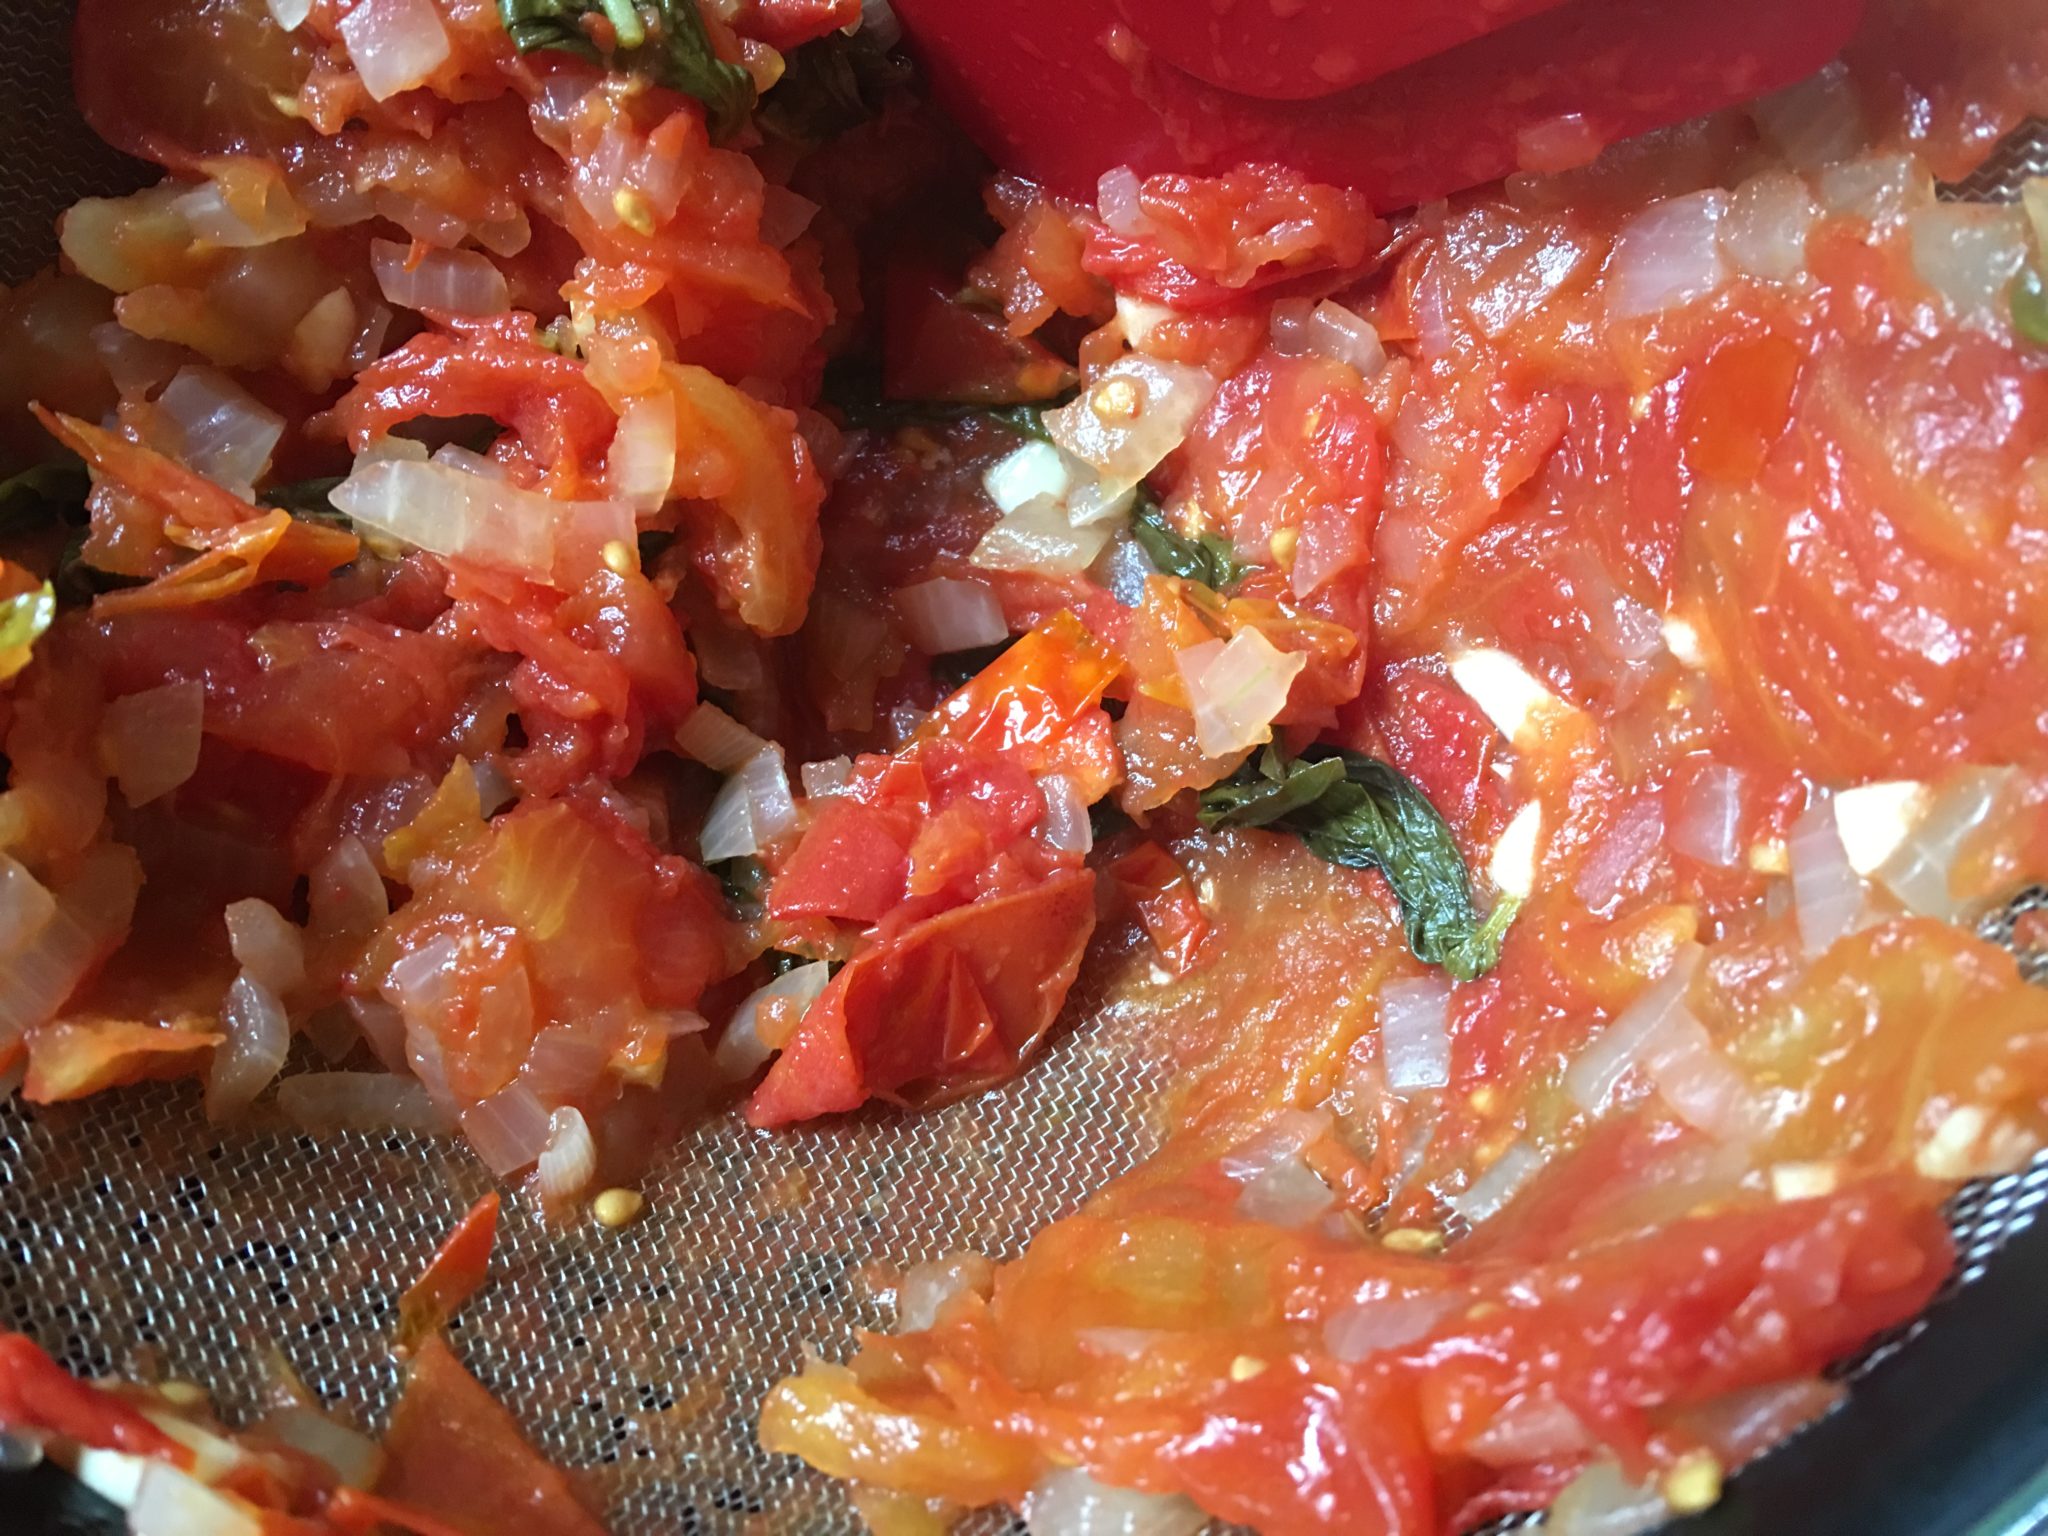 remains in sieve of pureed tomato sauce